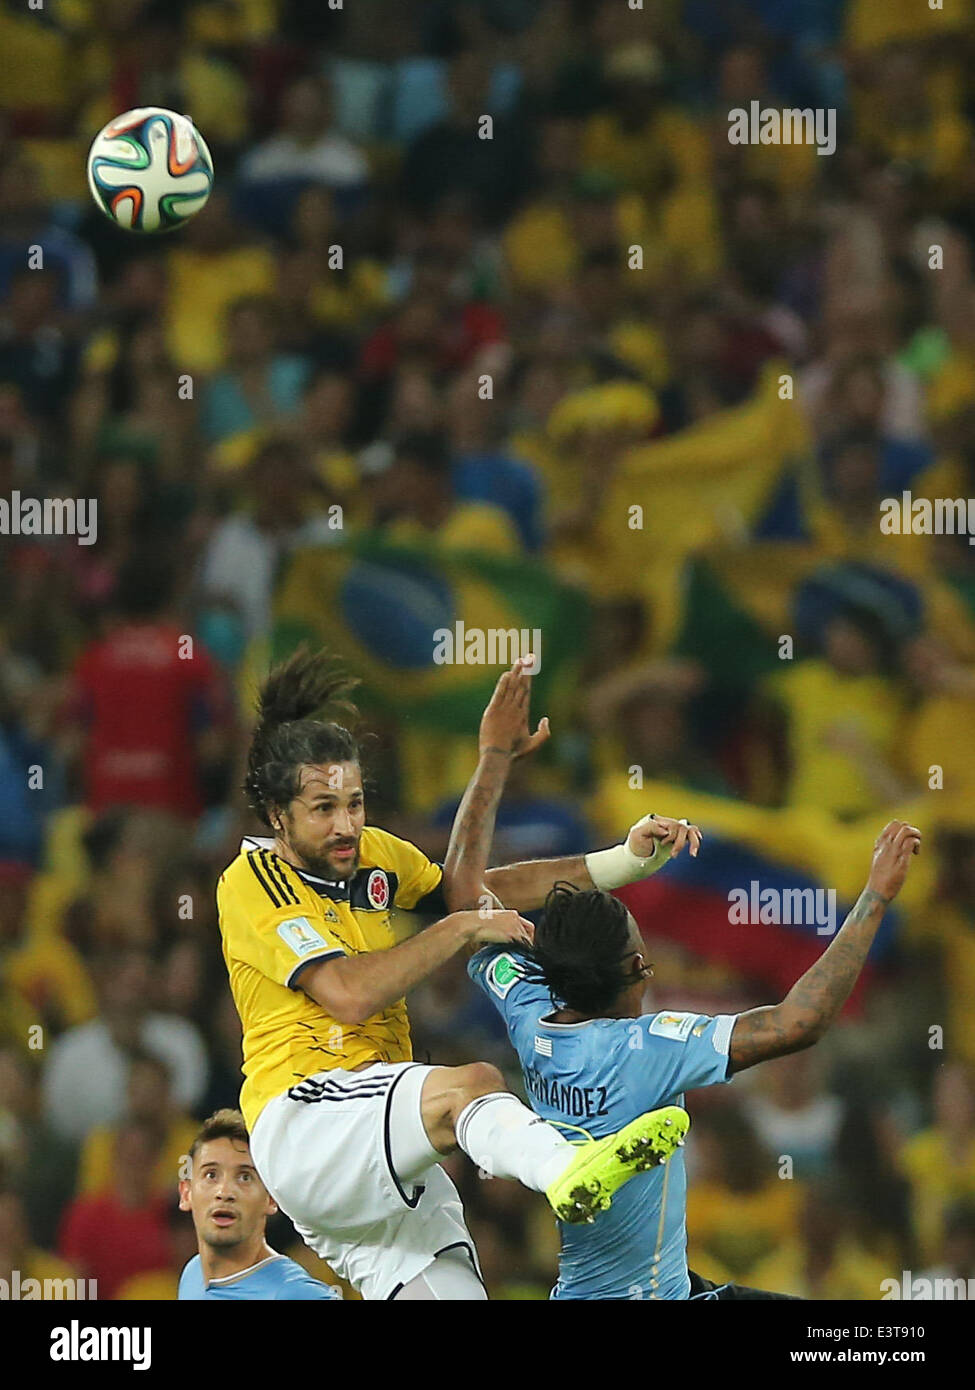 Rio De Janeiro, Brazil. 28th June, 2014. Colombia's Mario Yepes (L) jumps for the ball during a Round of 16 match between Colombia and Uruguay of 2014 FIFA World Cup at the Estadio do Maracana Stadium in Rio de Janeiro, Brazil, on June 28, 2014. Colombia won 2-0 over Uruguay on Saturday. Credit:  Xu Zijian/Xinhua/Alamy Live News Stock Photo